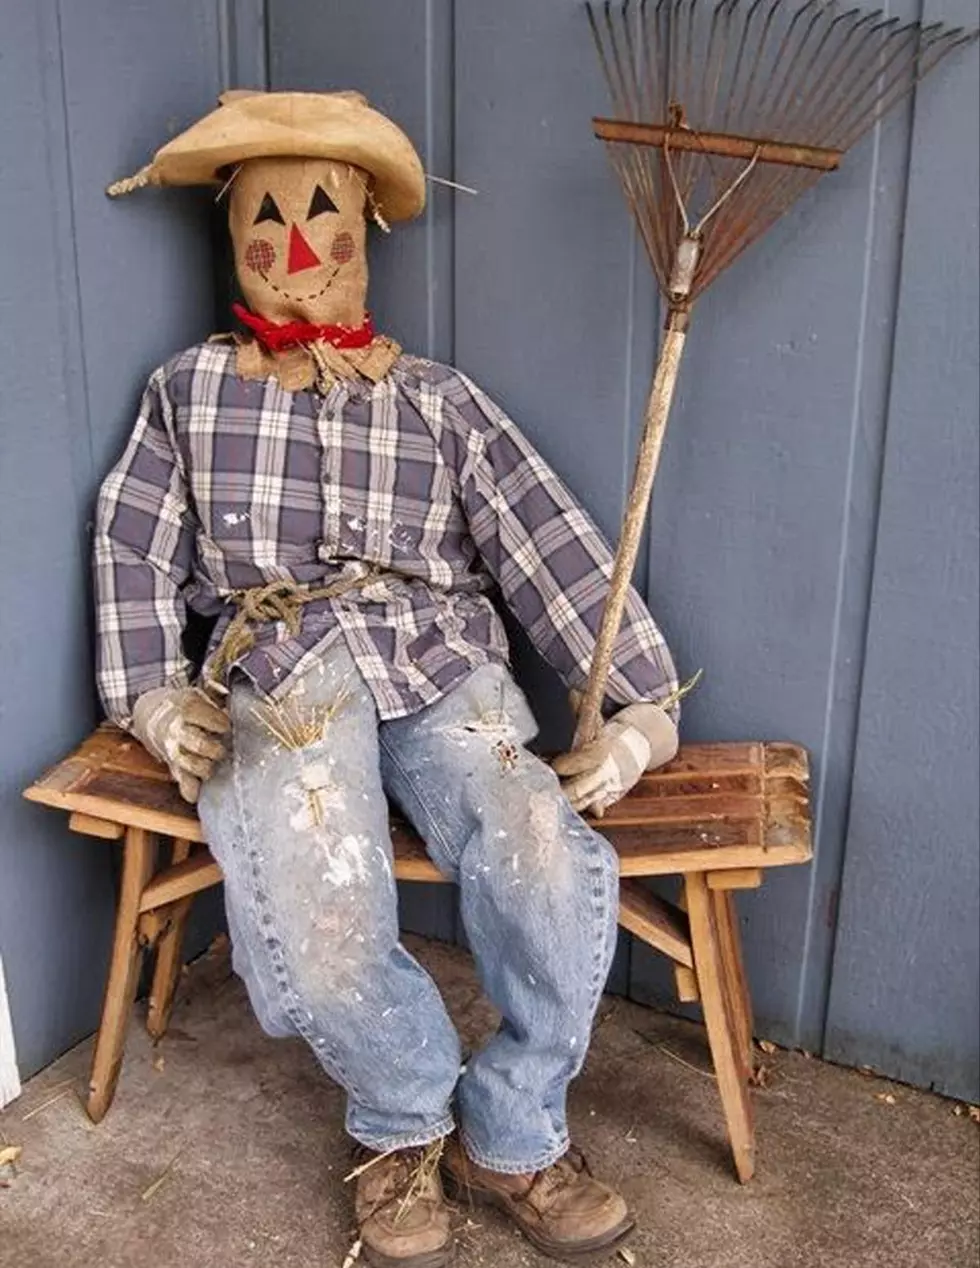 Pasco Parks and Recreation Present the Scarecrow to Go Contest